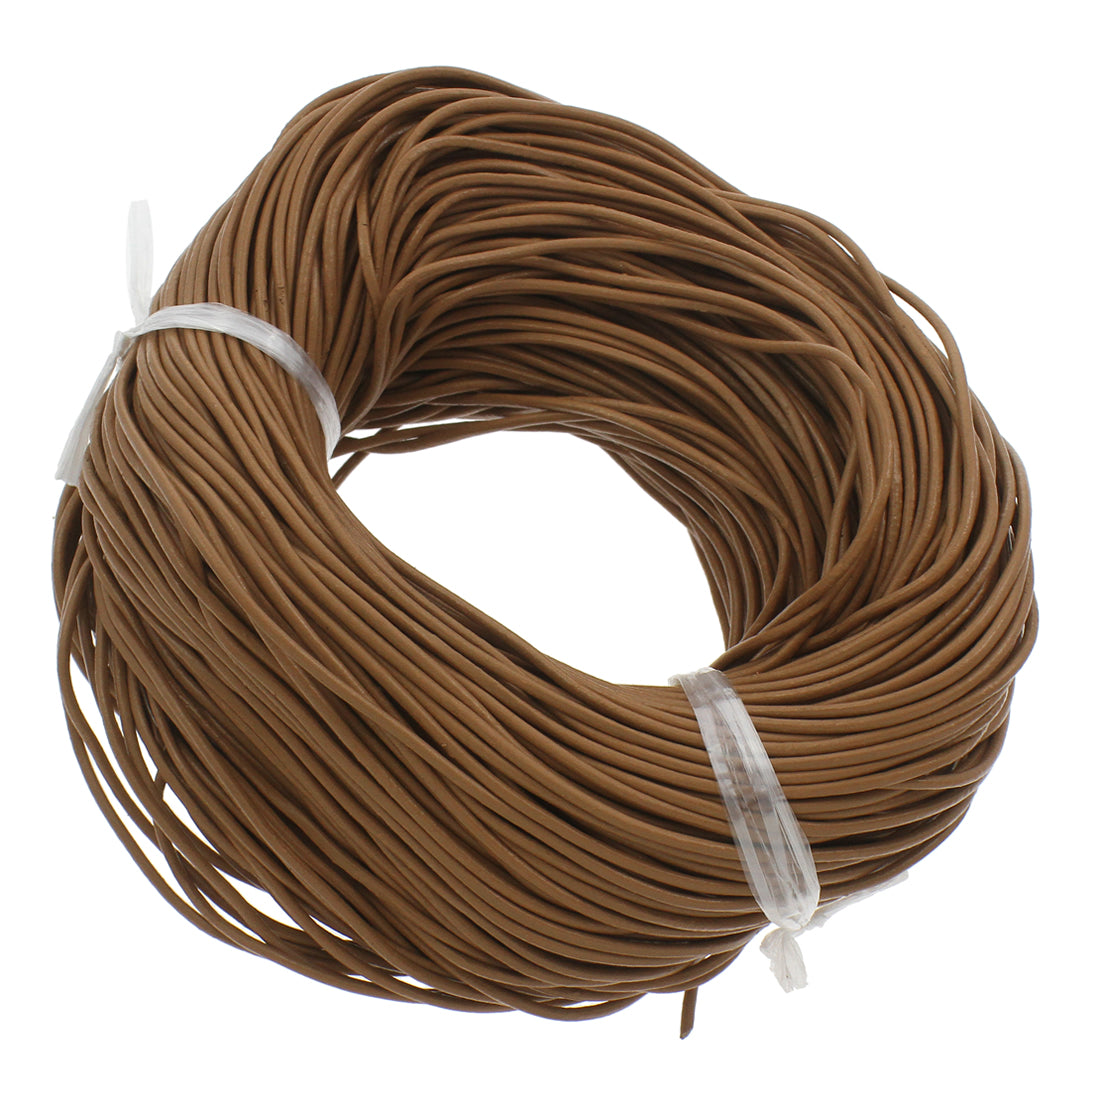 BROWN 11 Leather Lace Round Cord on Card Spool - 2mm x 20 yards - NEW222